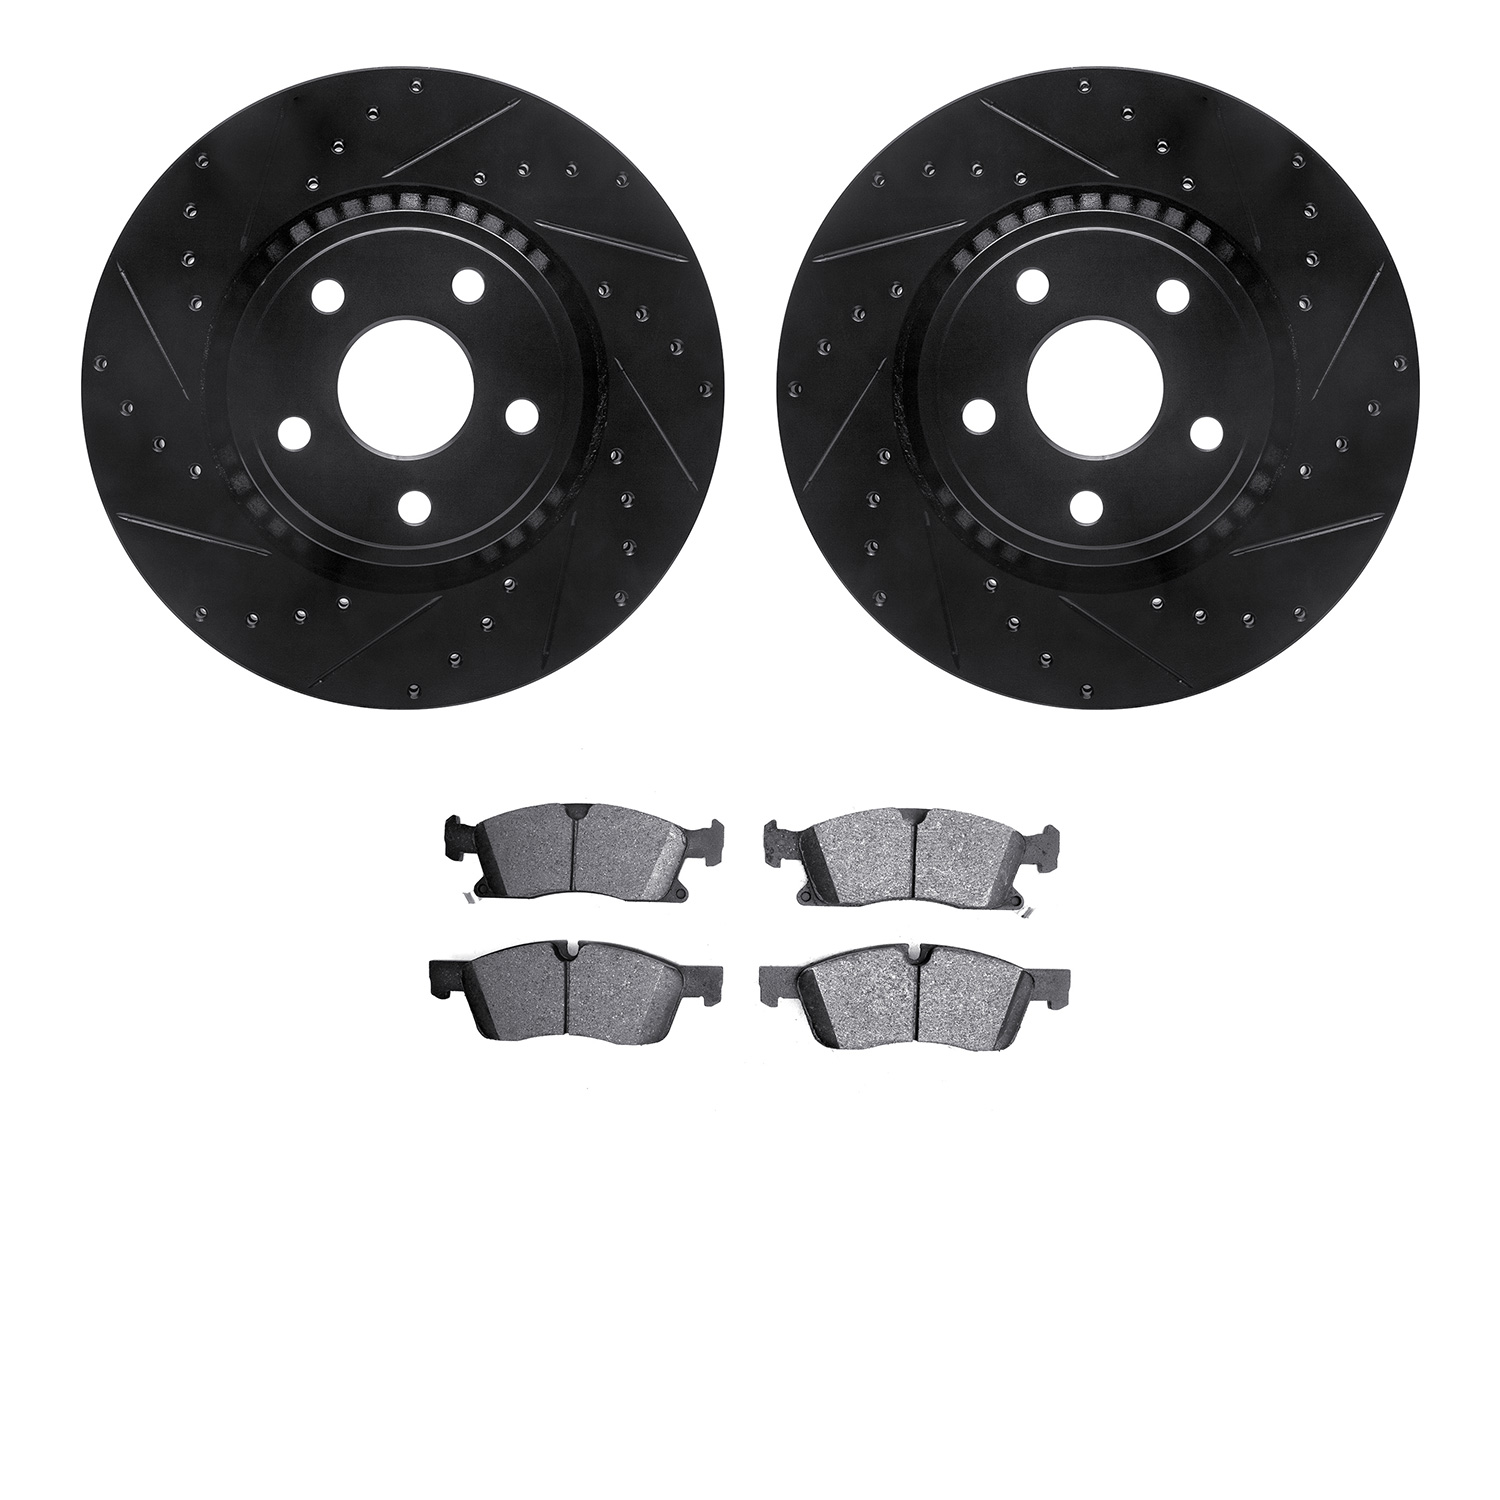 8402-42009 Drilled/Slotted Brake Rotors with Ultimate-Duty Brake Pads Kit [Black], Fits Select Mopar, Position: Front